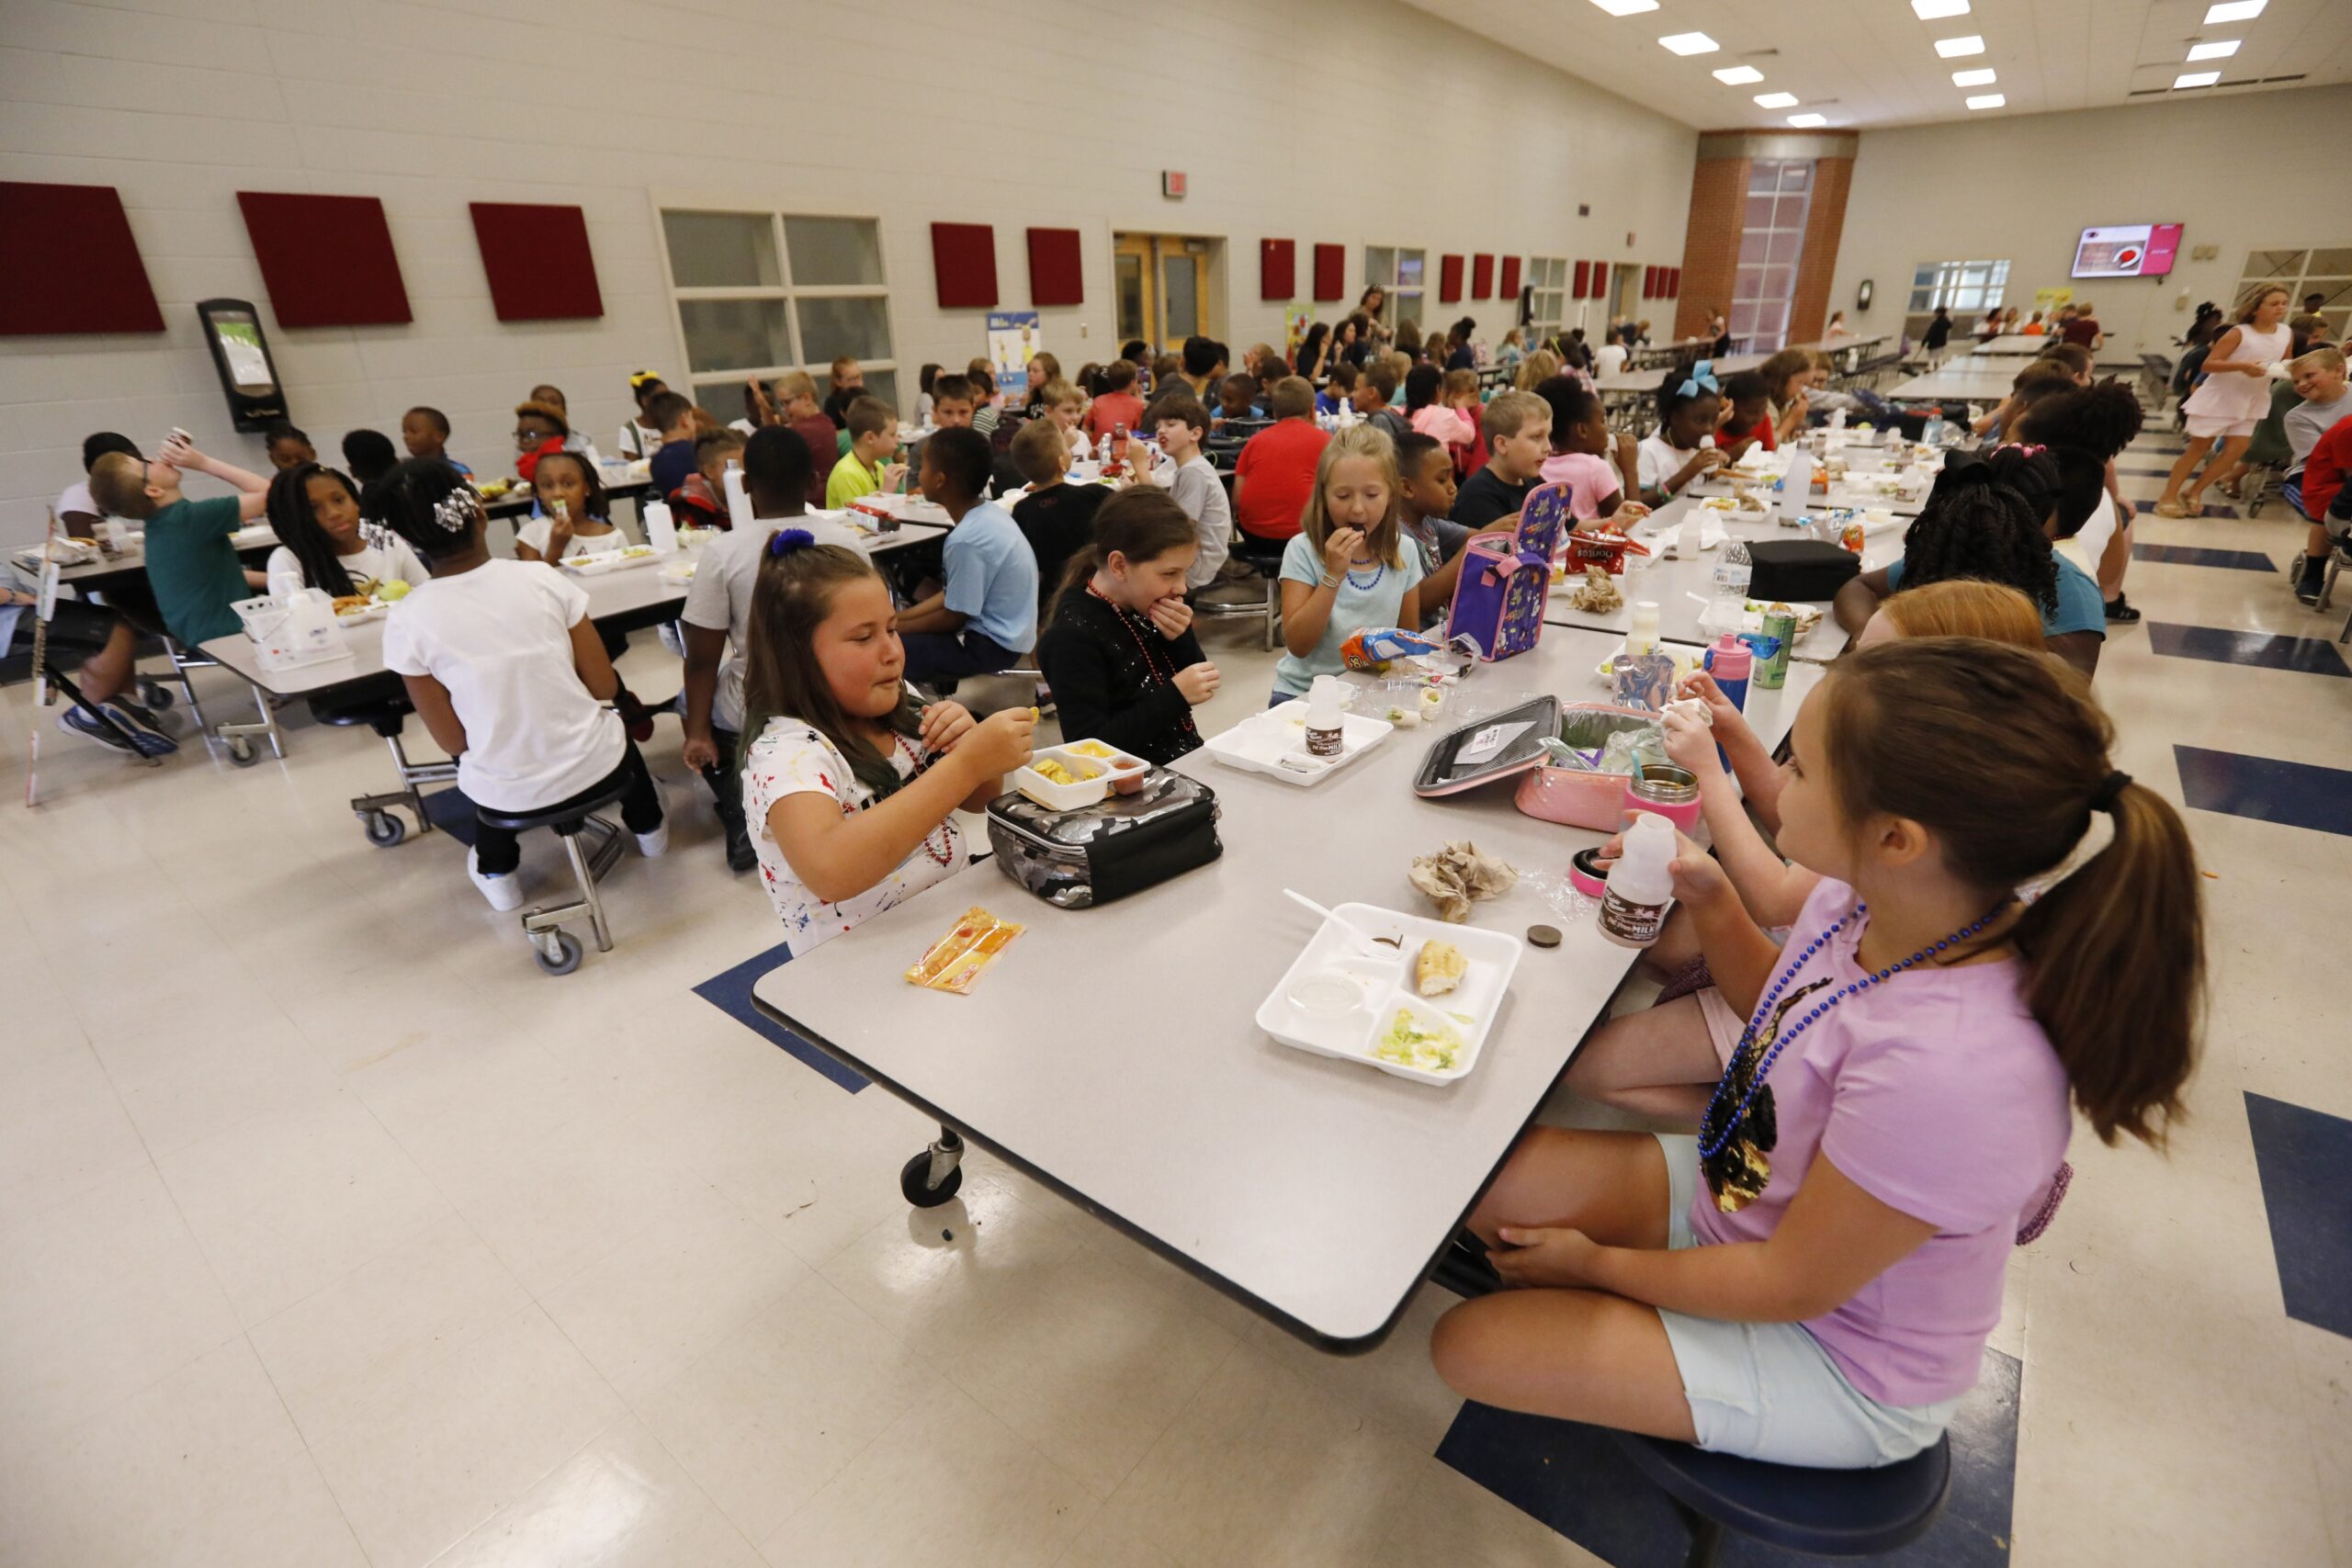 Students eat lunch in a school cafeteria